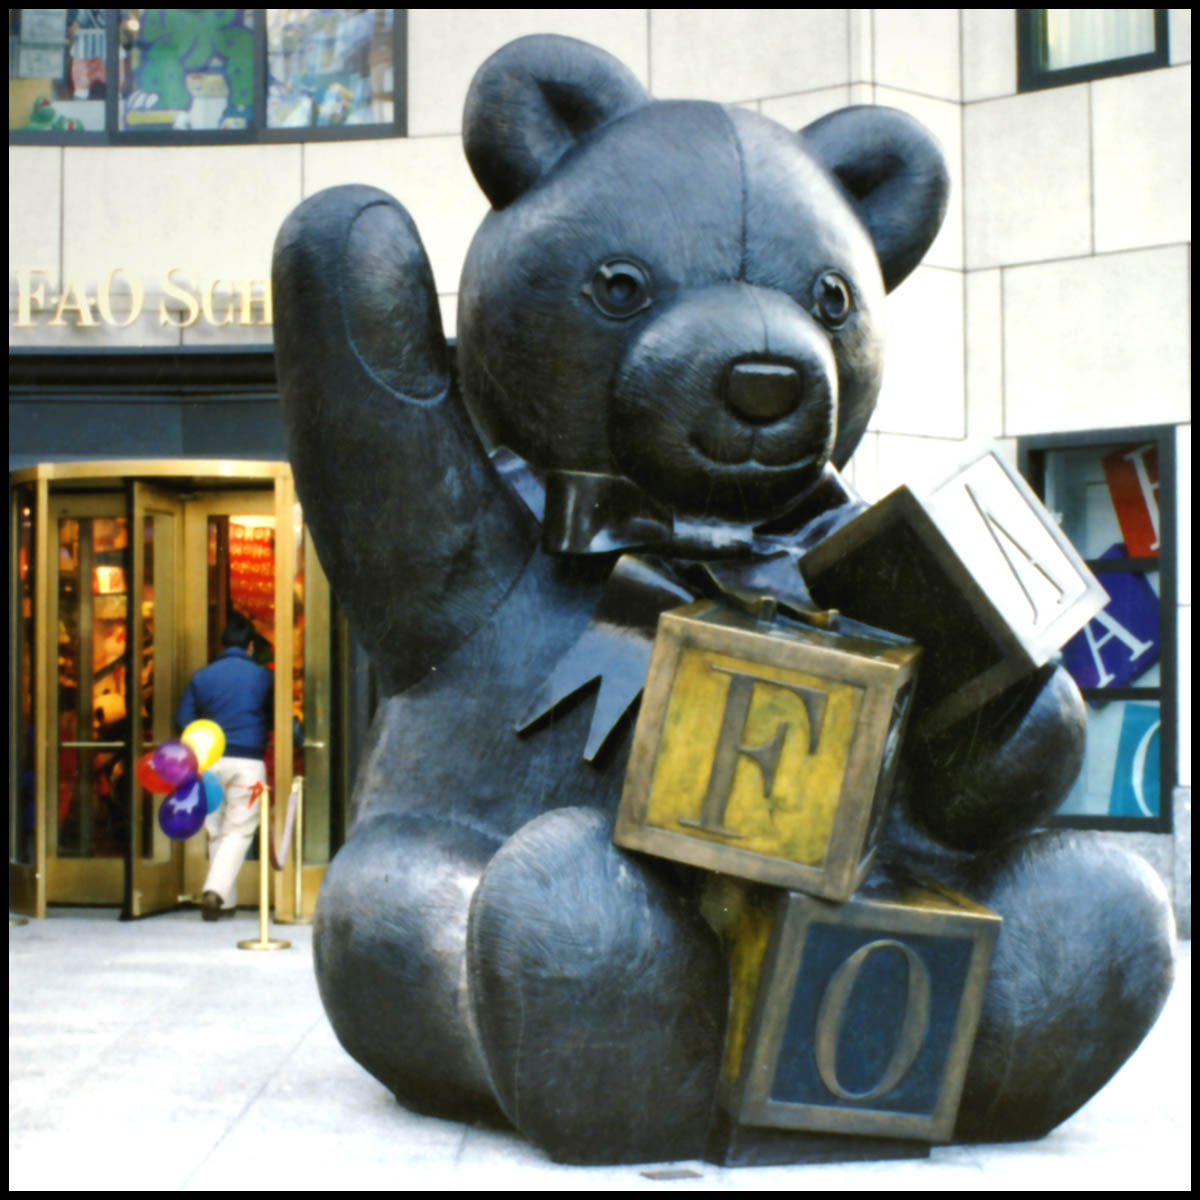 photo of bronze teddy bear with arm raised and holding blocks in front of city store